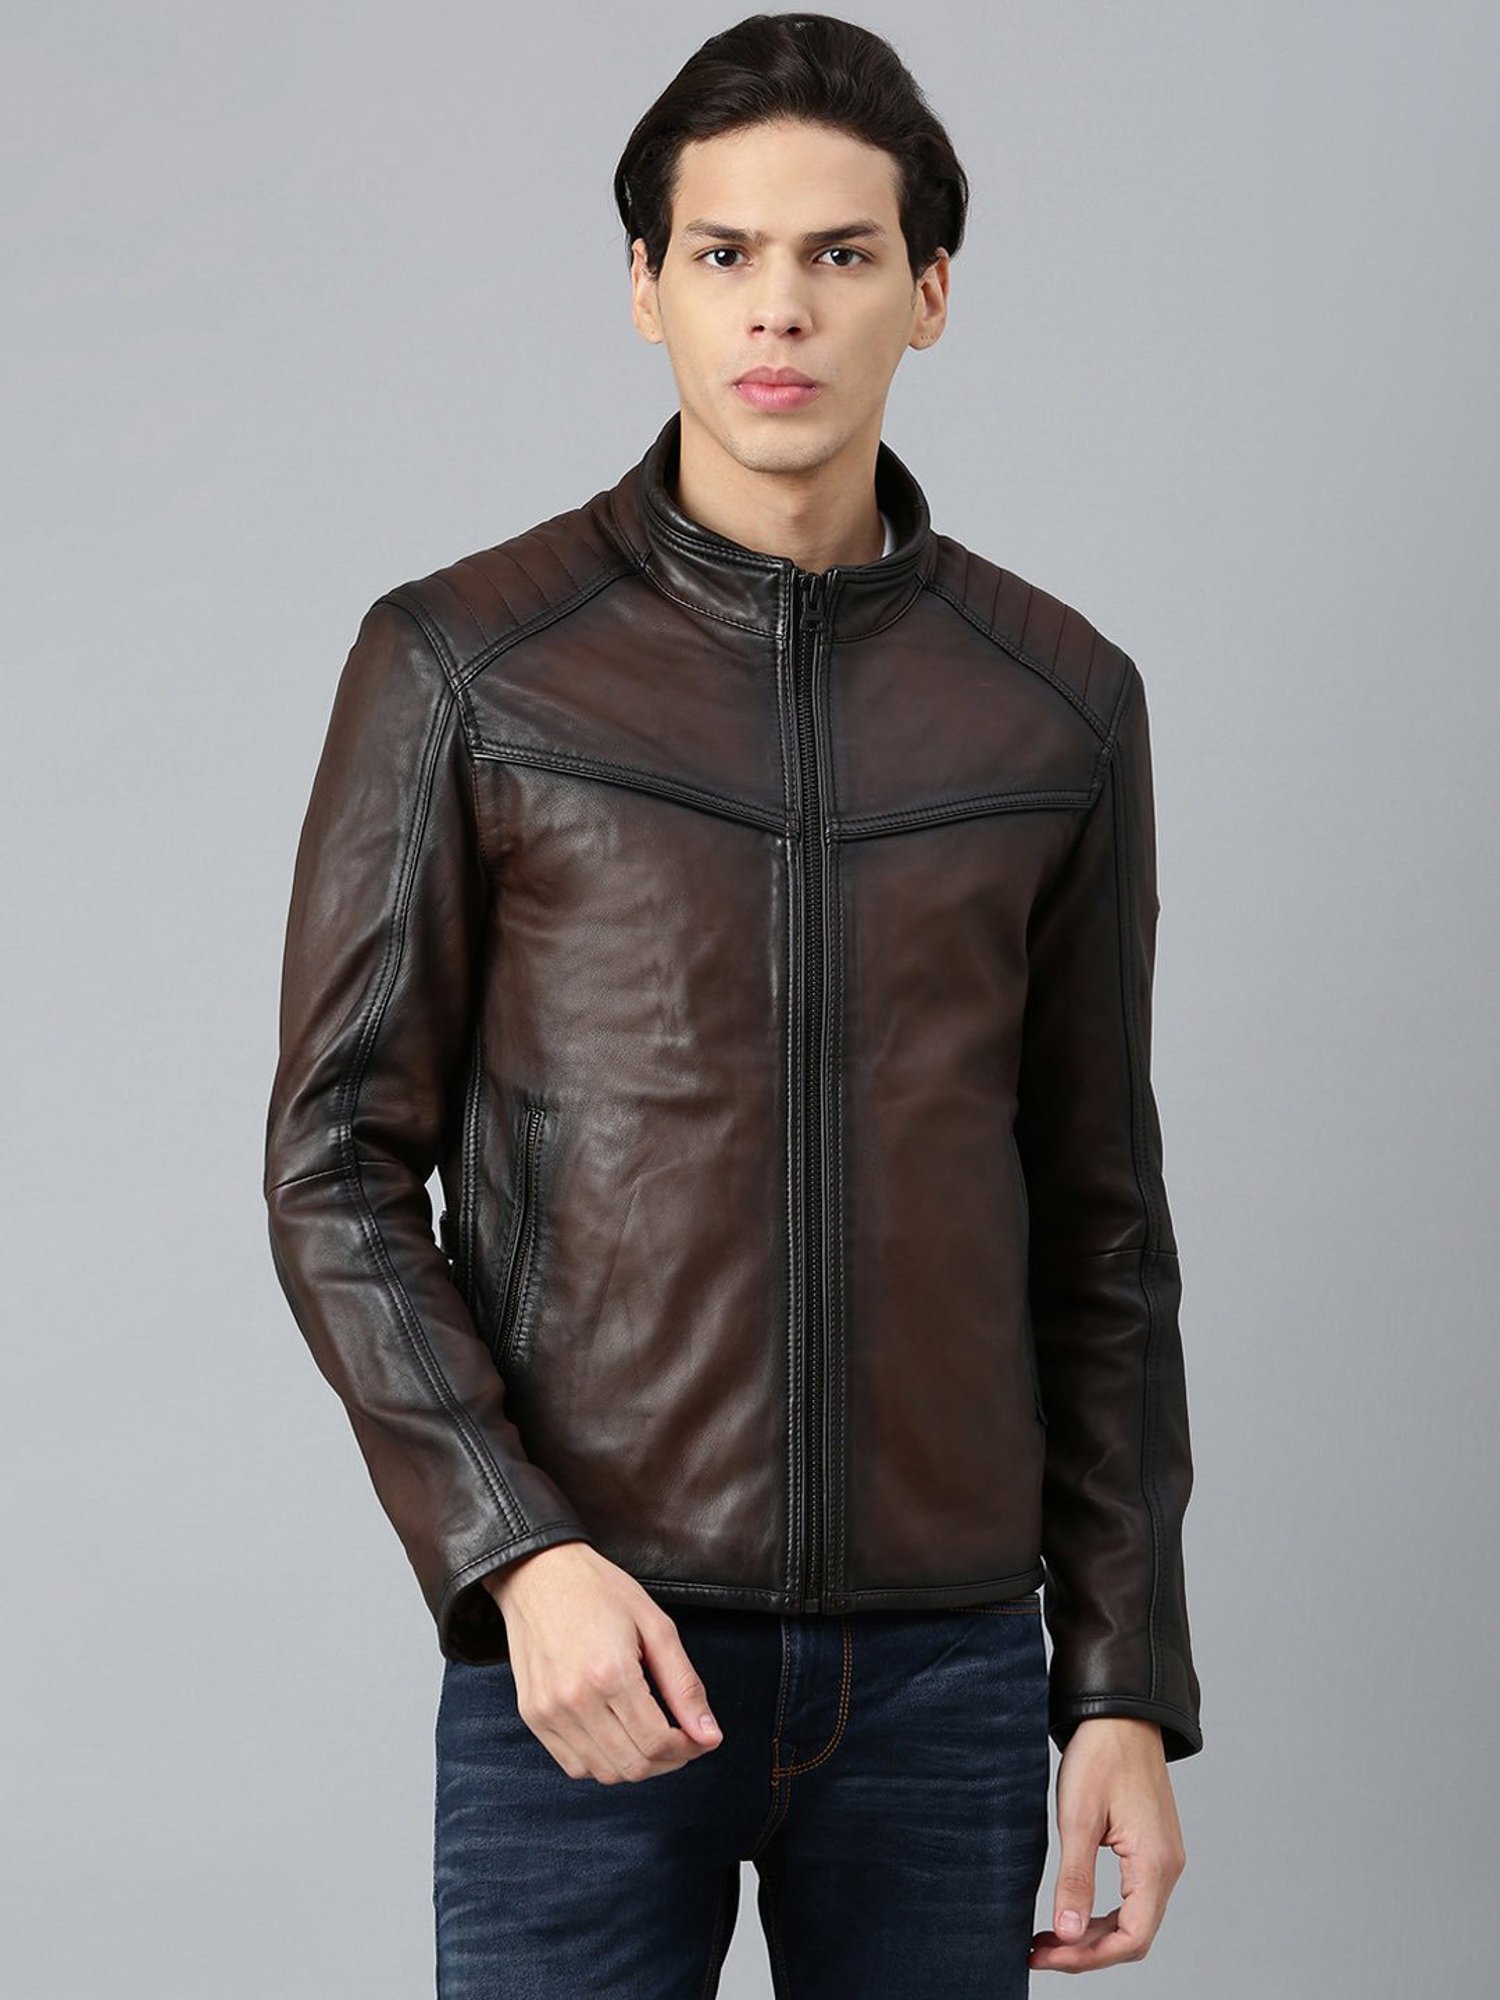 Mens Round Neck Leather Jacket at Rs 3500 | Leather Jackets in New Delhi |  ID: 21044566648